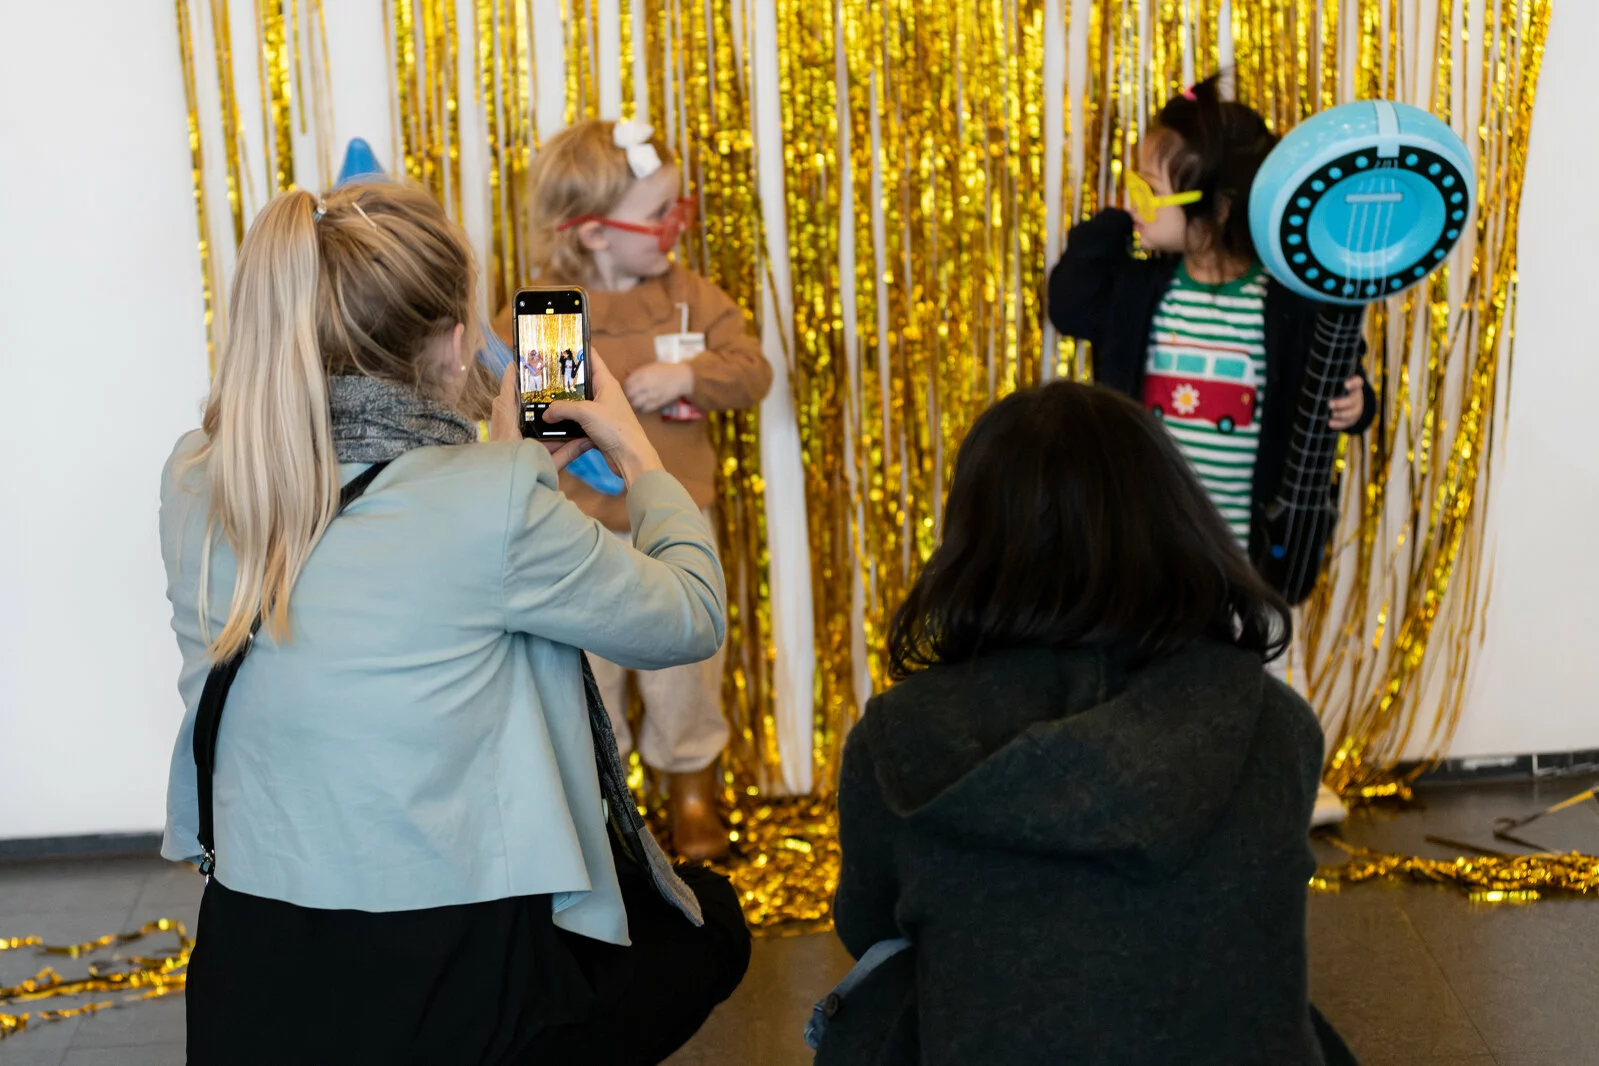 Two children pose in front of gold streamers as their adults take photos of them.